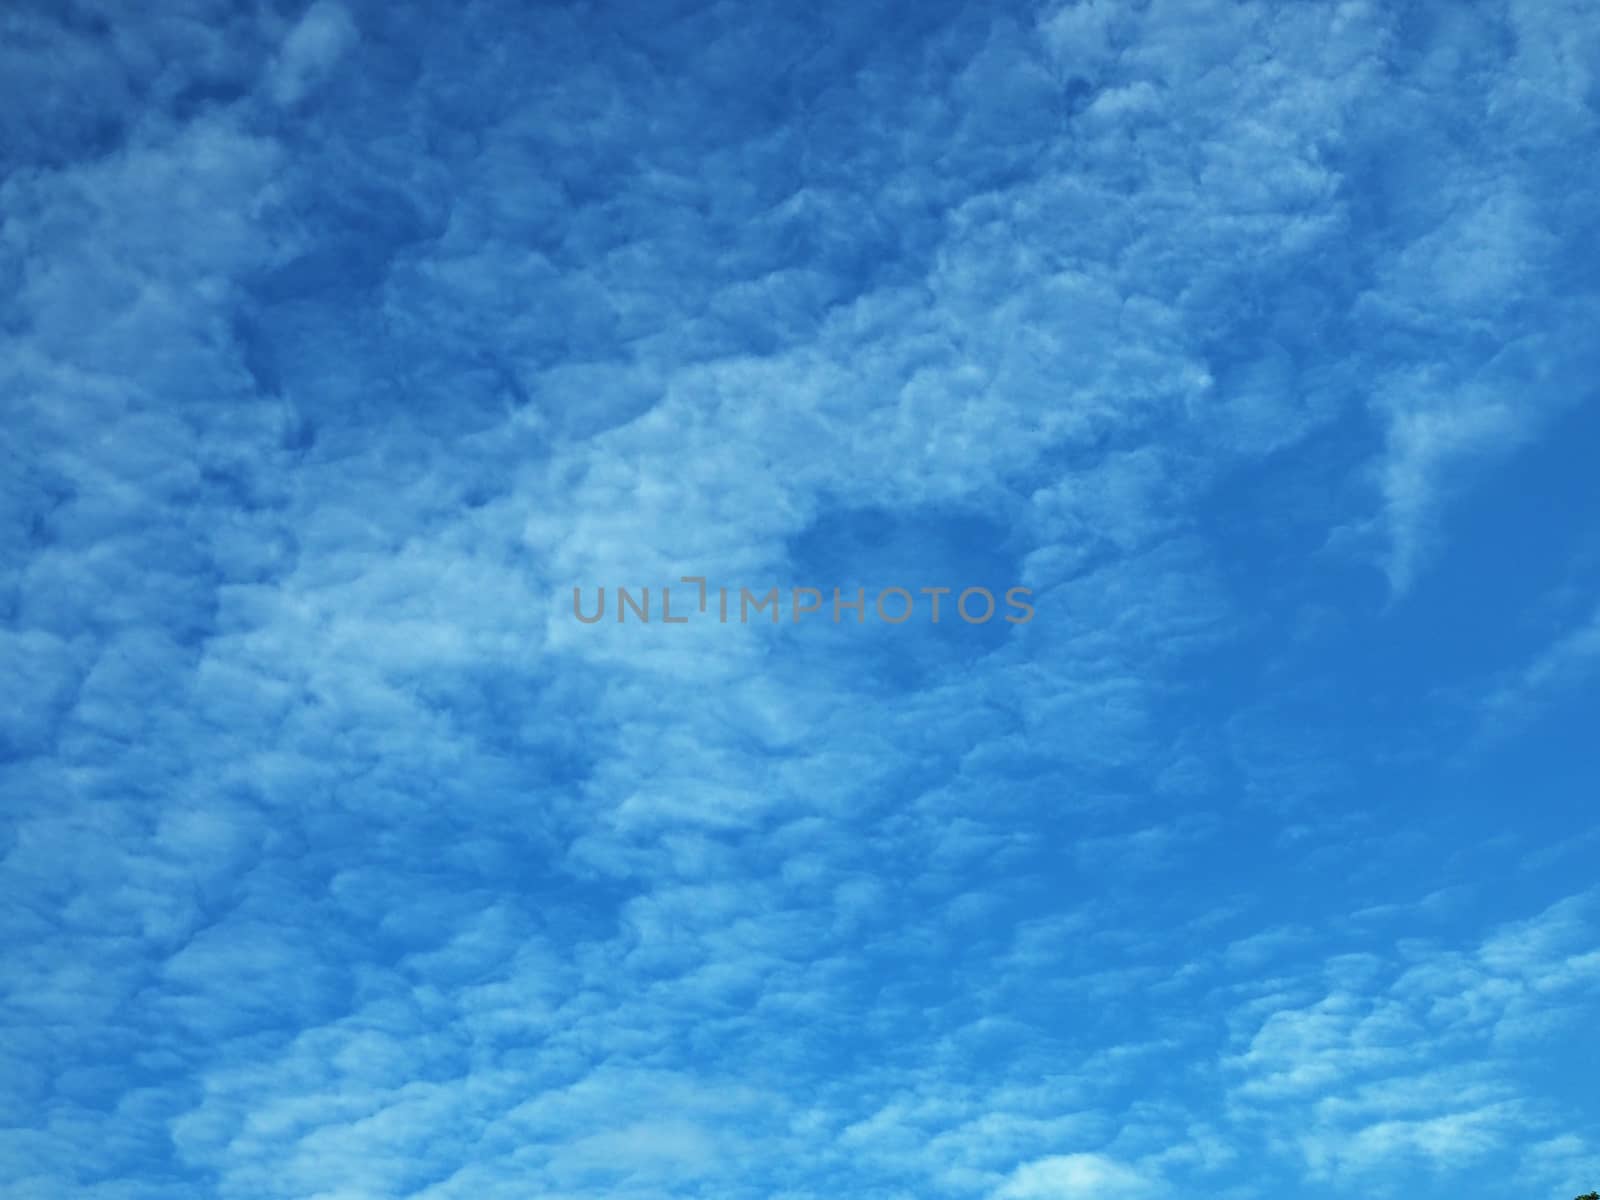 Bright blue sky For making in the background Or used in graphic work.